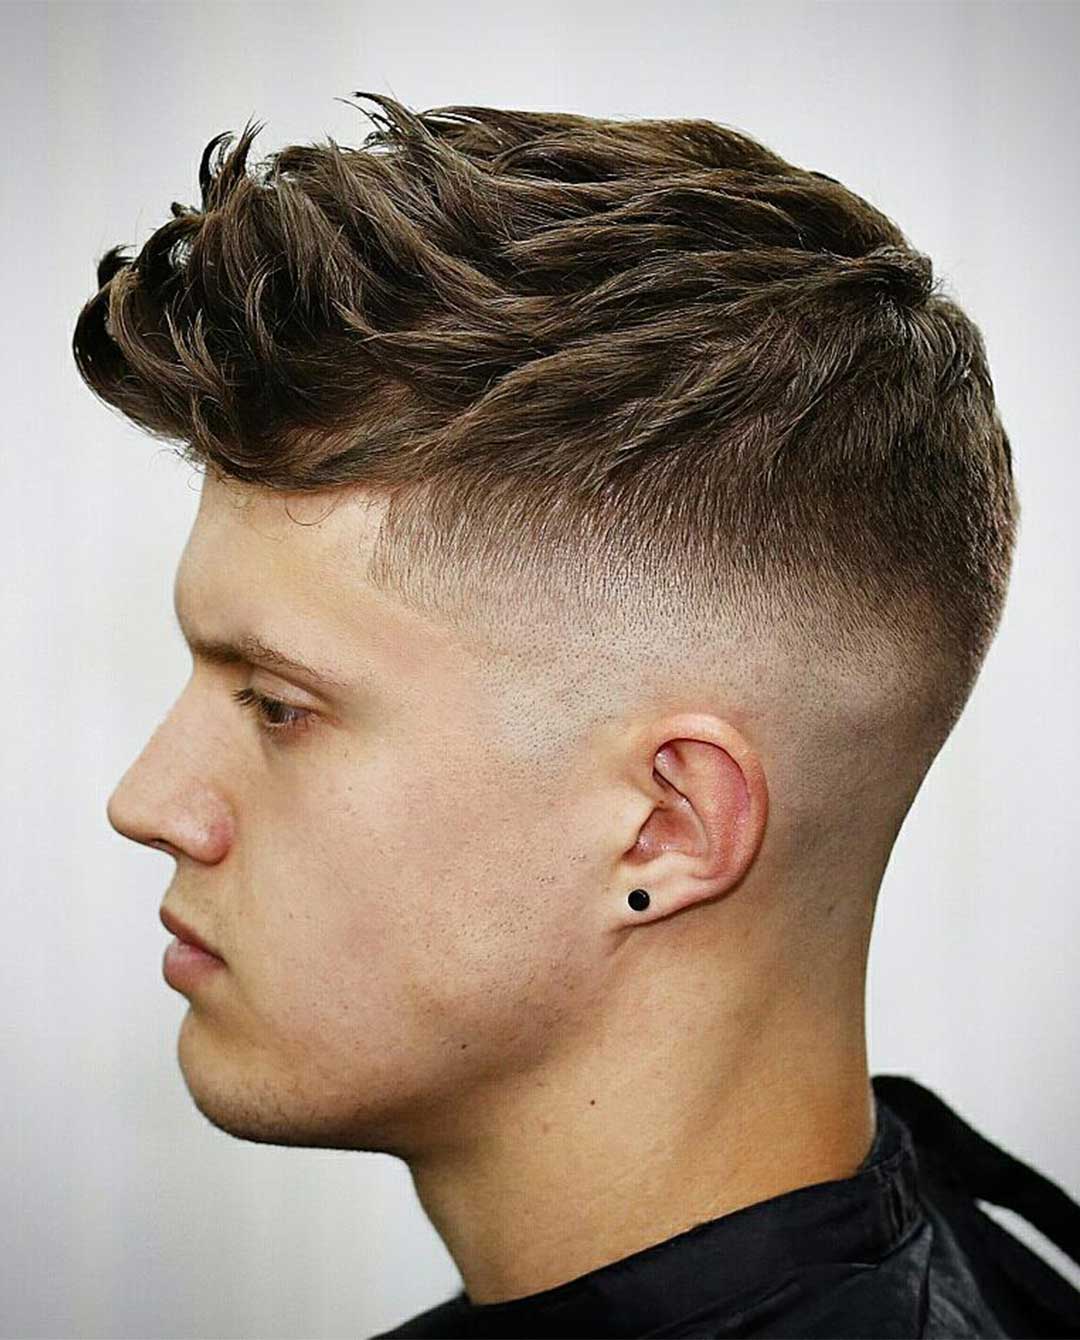 Textured Fohawk with High Fade